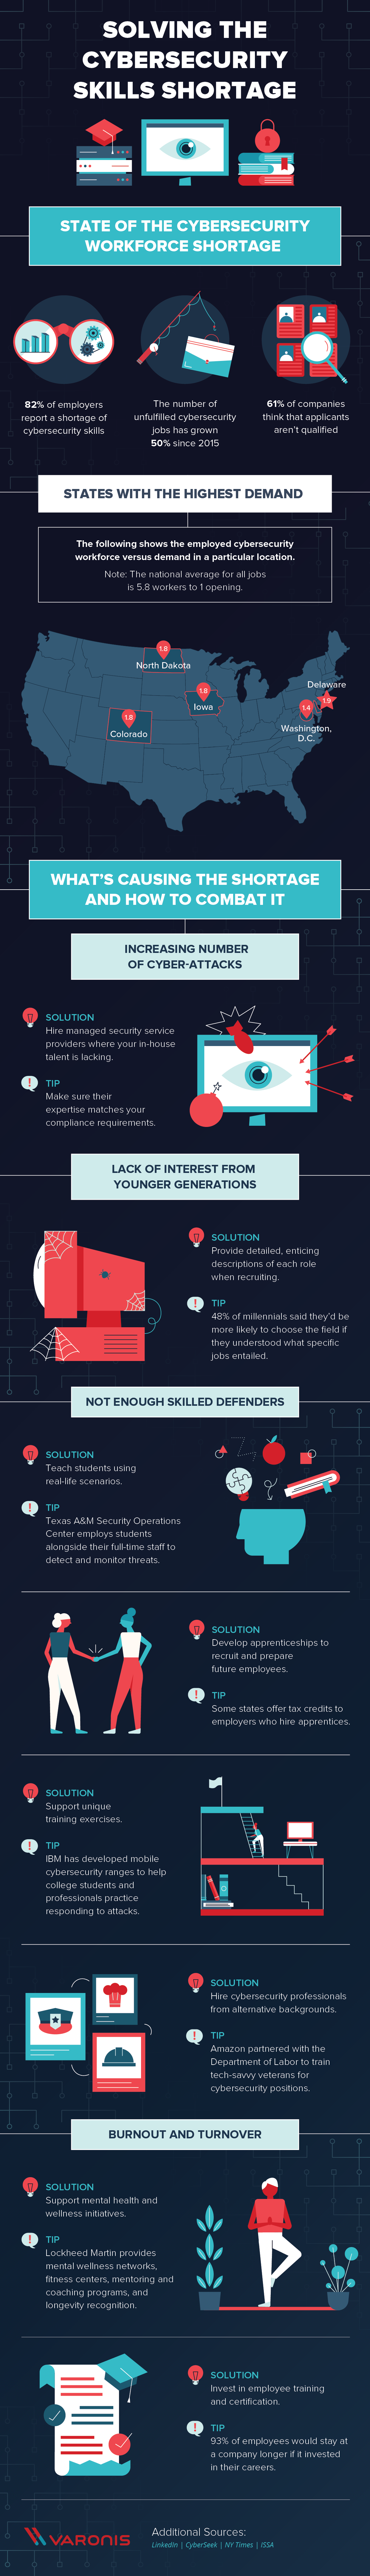 cybersecurity skills shortage infographic - written content found in original post - the inforgraphic has illustrations of the US showing job opportunities, a computer screen with an eye on it, people shaking hands